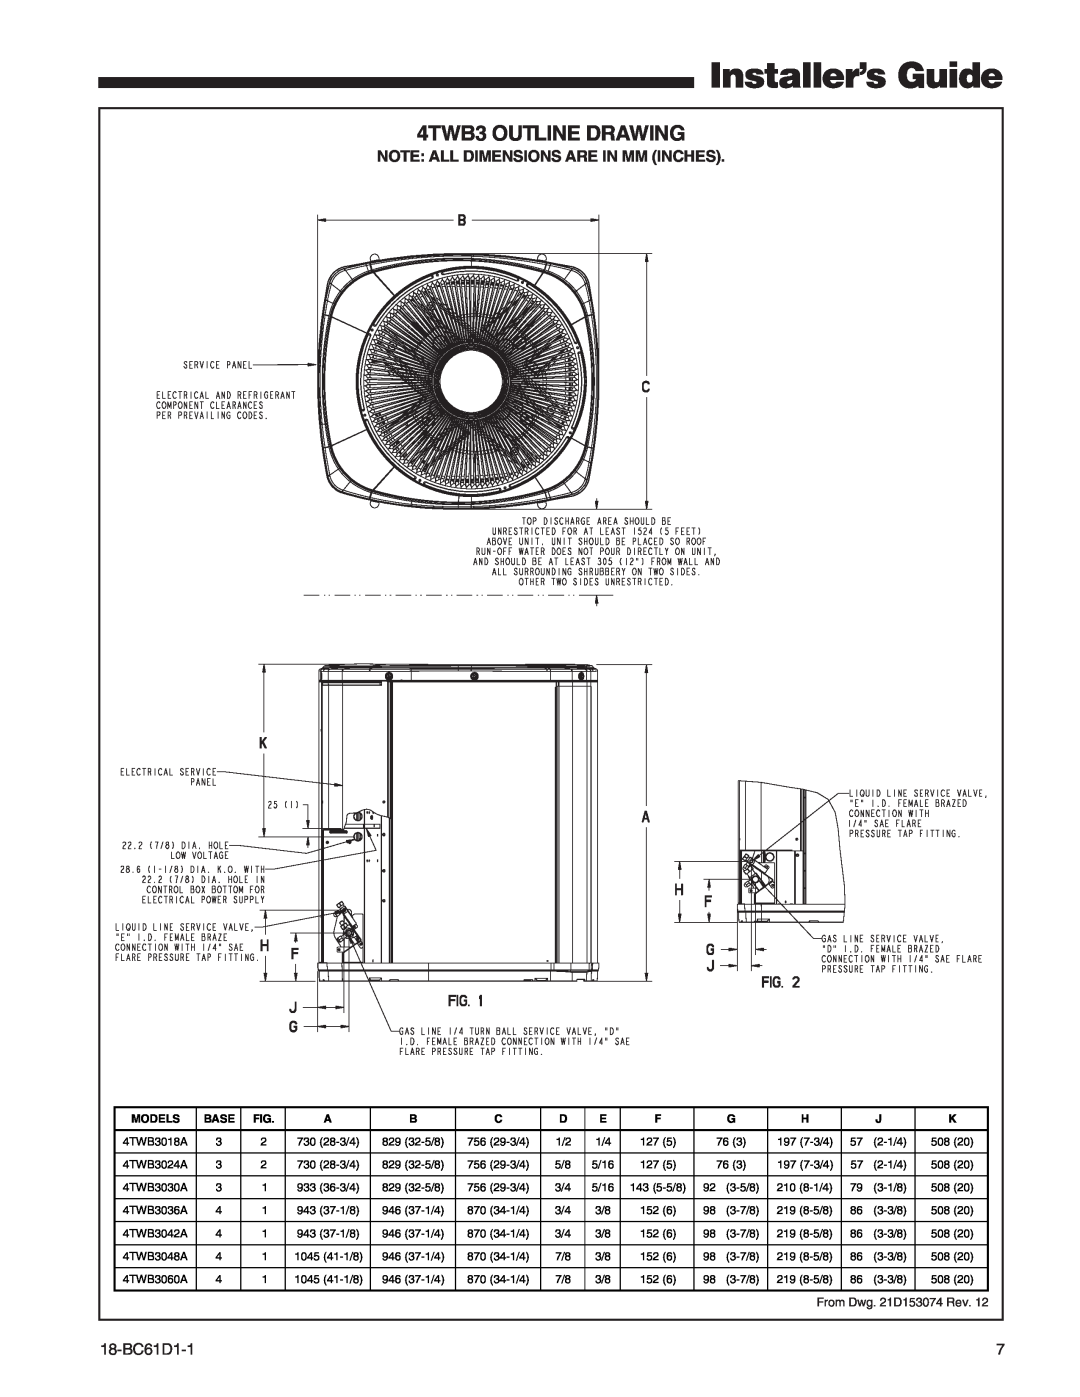 Trane 4TWB3 manual Installer’s Guide, Note All Dimensions Are In Mm Inches, 18-BC61D1-1, Models, Base 